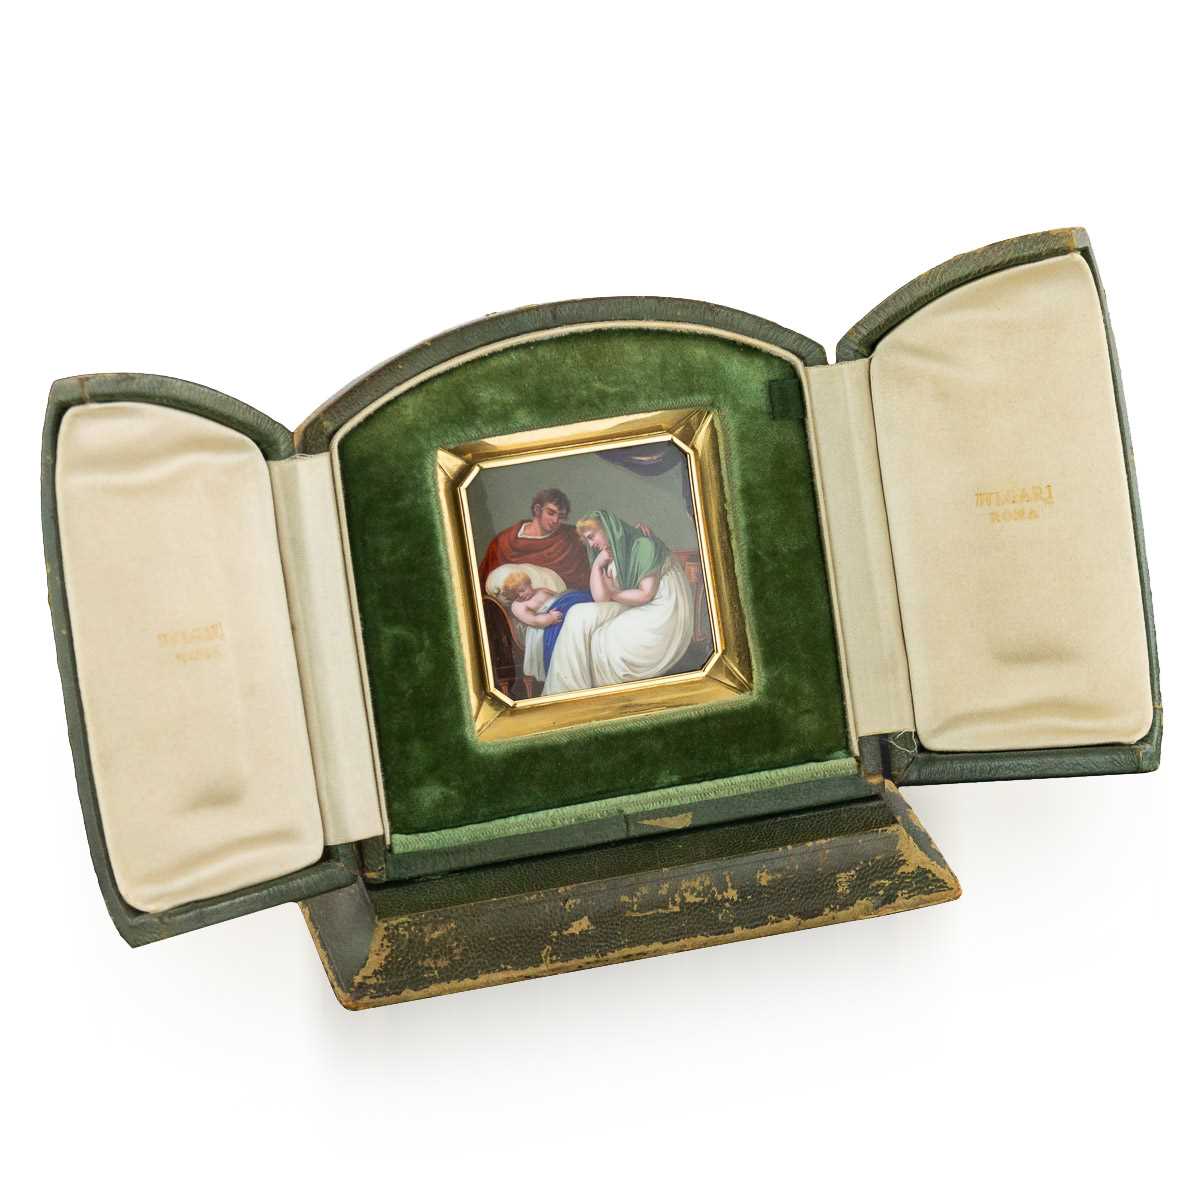 AN 18K GOLD AND ENAMEL EARLY 19TH CENTURY ICON RETAILED BY BULGARI